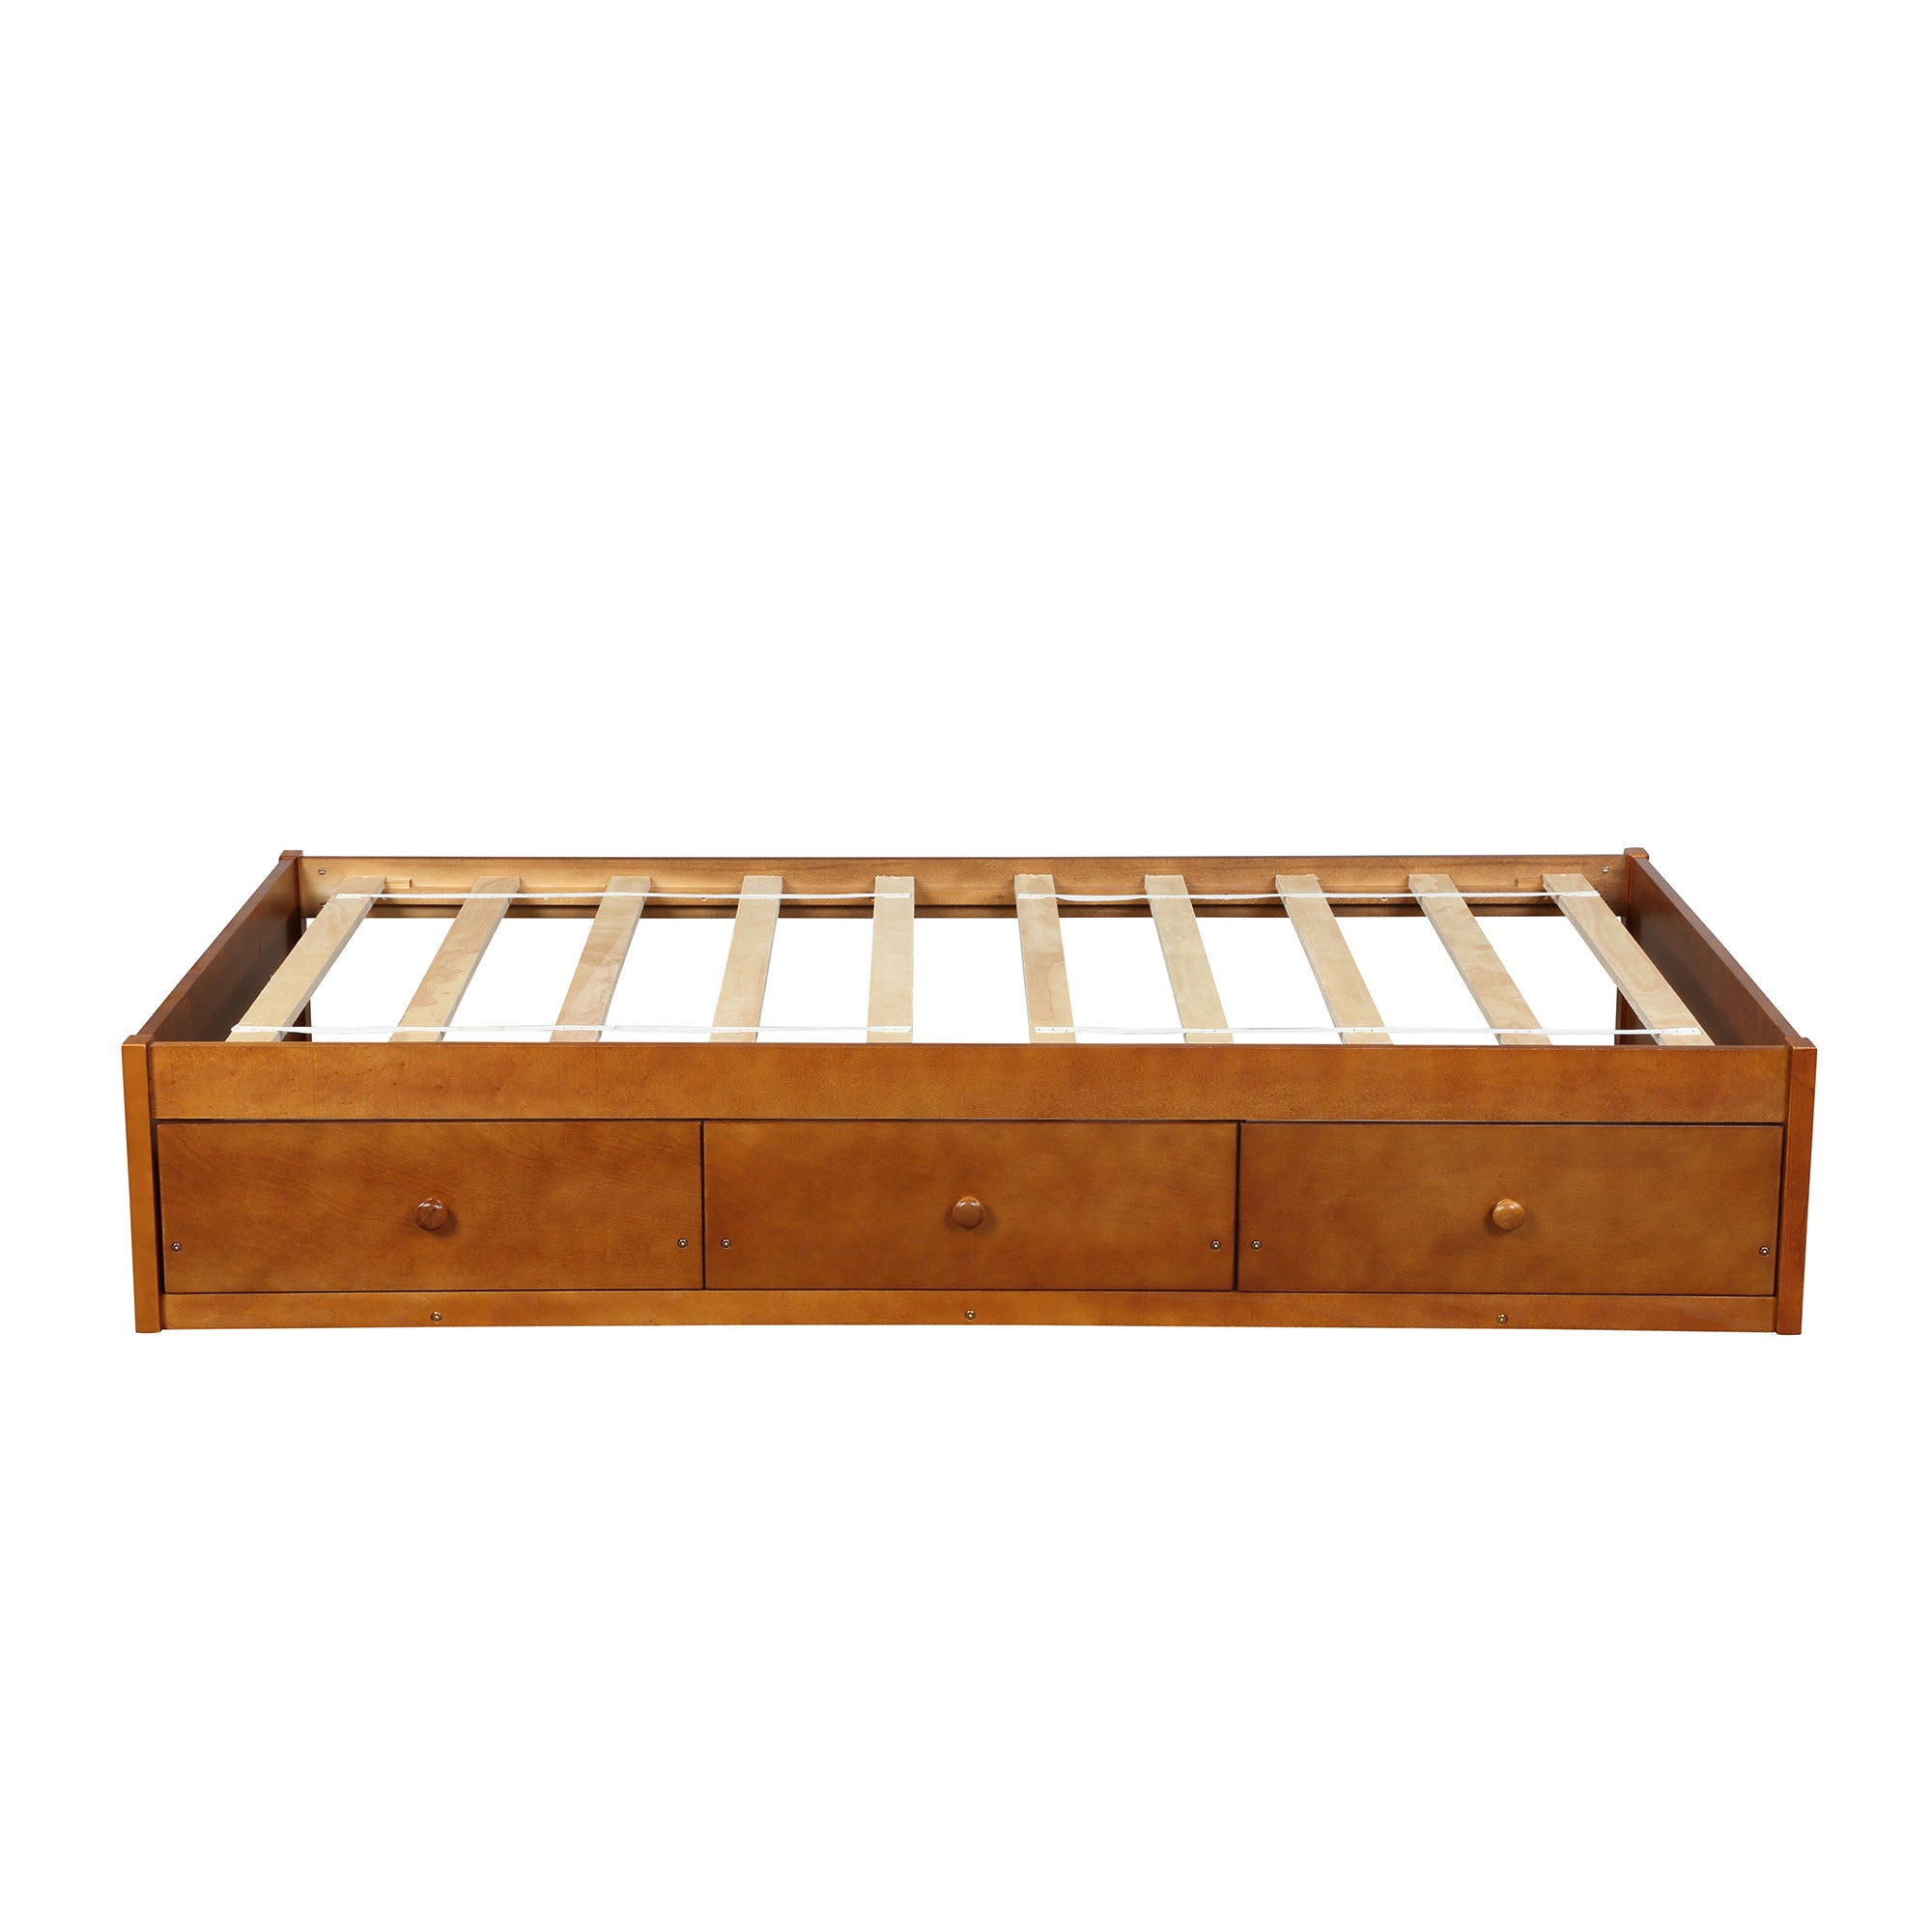 Twin Platform Storage Bed with 3 Drawers